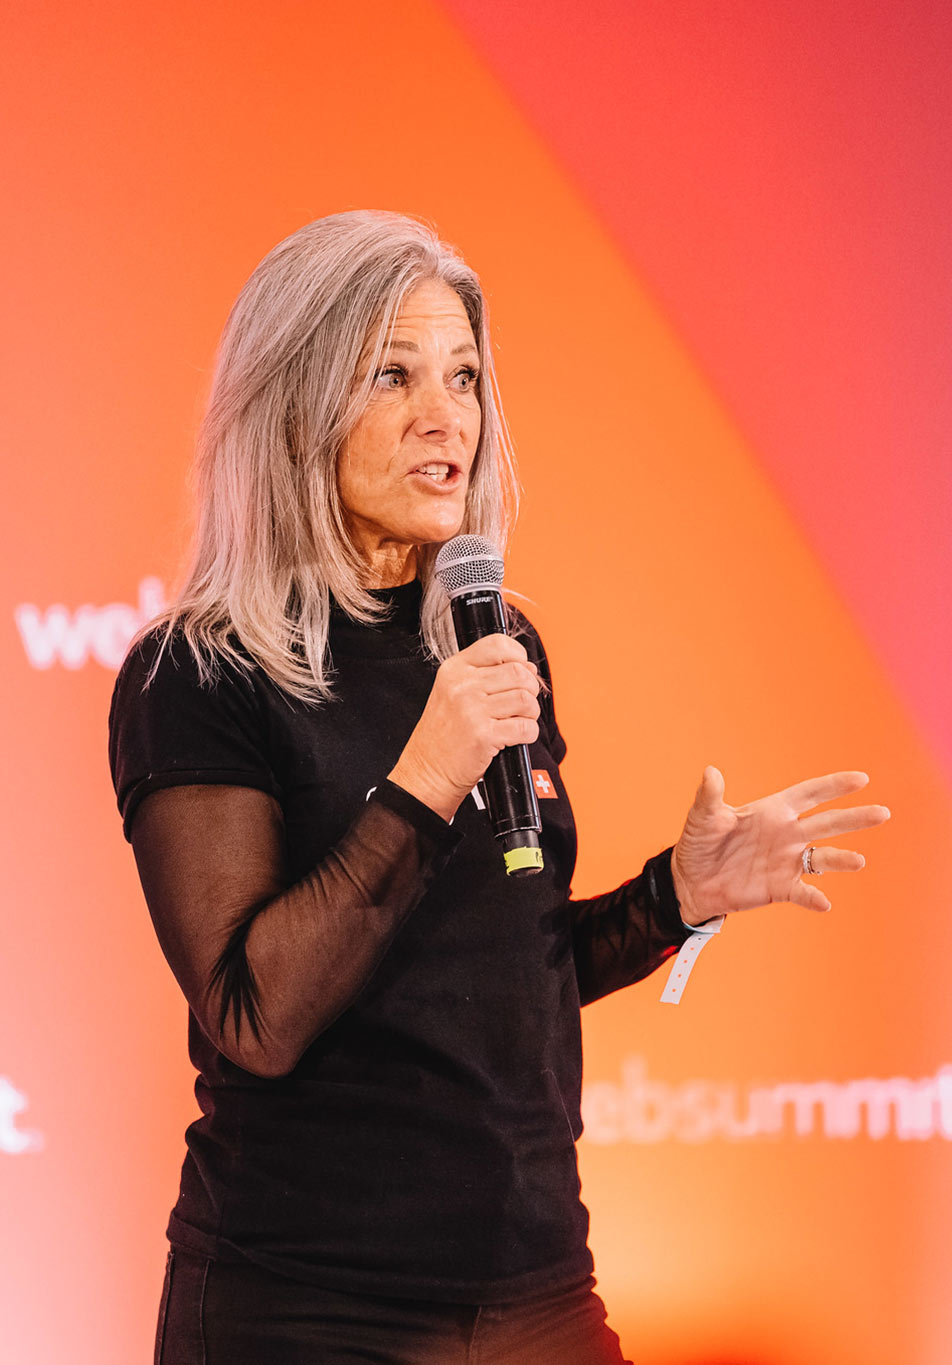 A photograph of a startup pitch on the Startup Showcase stage. The person is holding a microphone with their right hand and using their left hand to gesture. They appear to be speaking to a crowd.